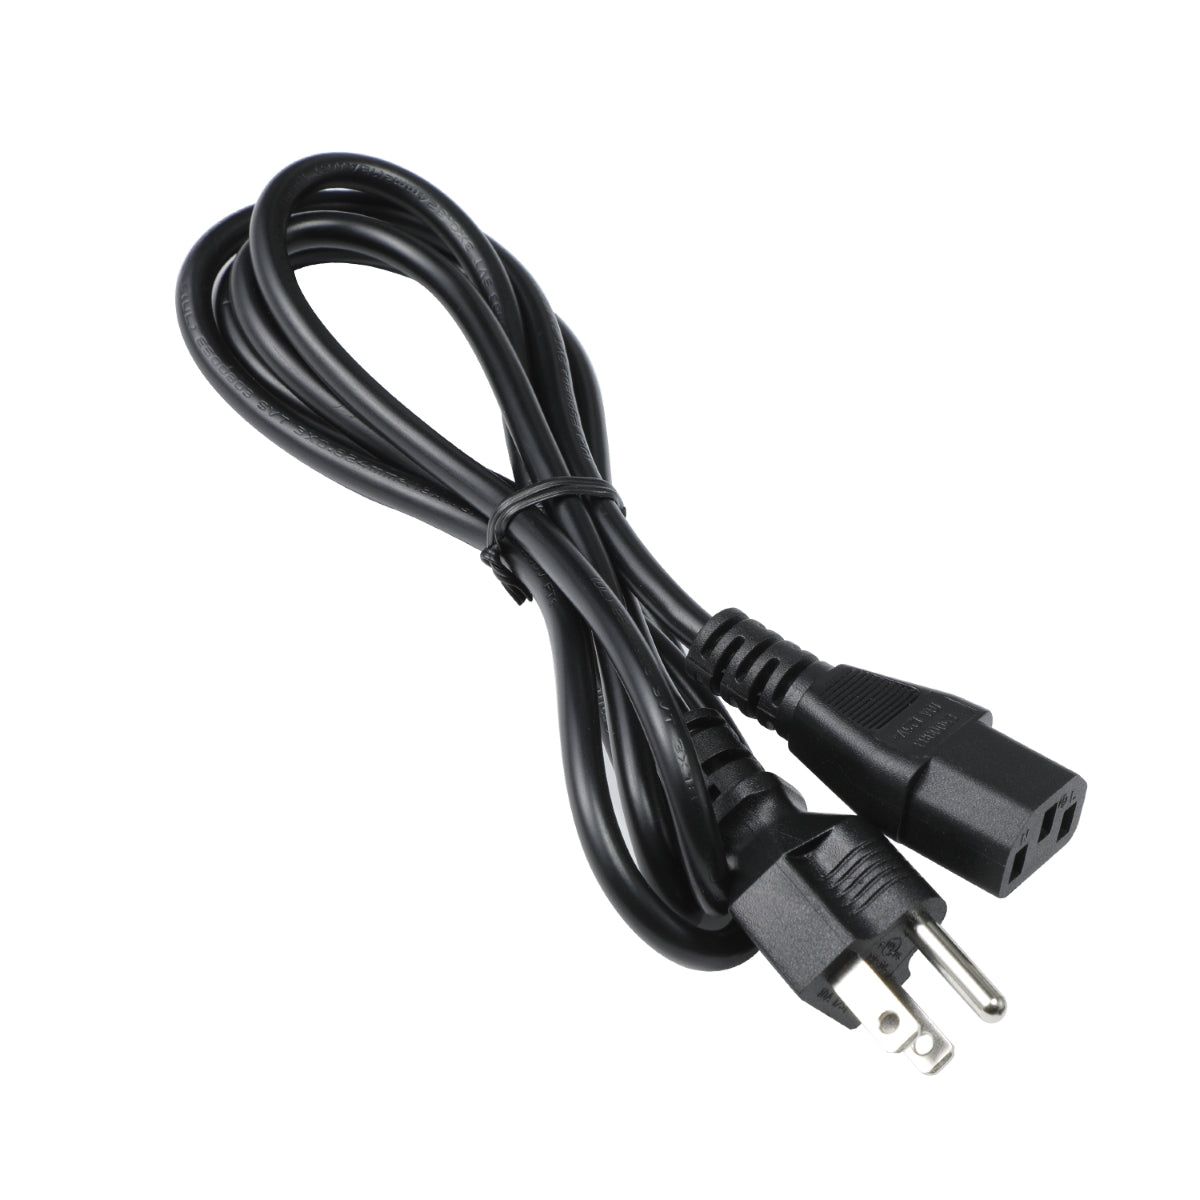 Power Cable for Philips 326M6FJSB Display.